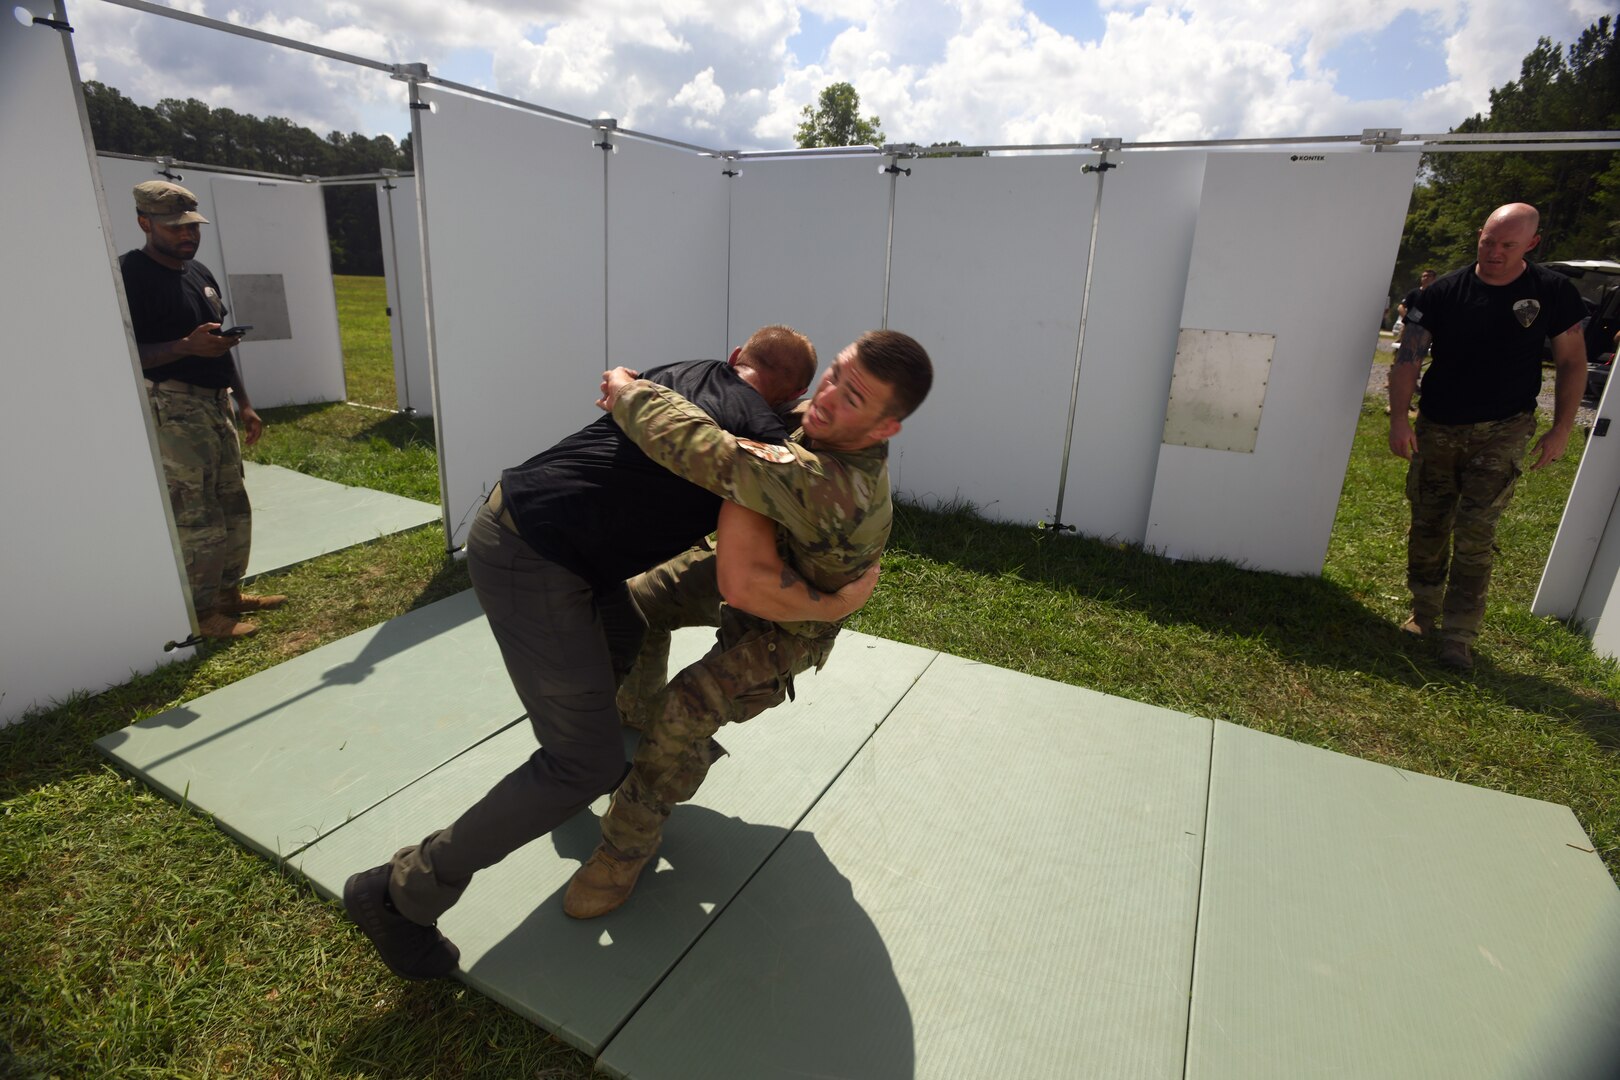 Army Sgt. Richard Carlson, a combat medic with the Minnesota Army National Guard’s Headquarters and Headquarters Troop, 1st Battalion, 94th Cavalry Regiment, brings down an opponent as part of the Valor Run event during the 2022 Army National Guard Best Warrior Competition, Volunteer Training Site-Tullahoma, Tennessee, July 28.